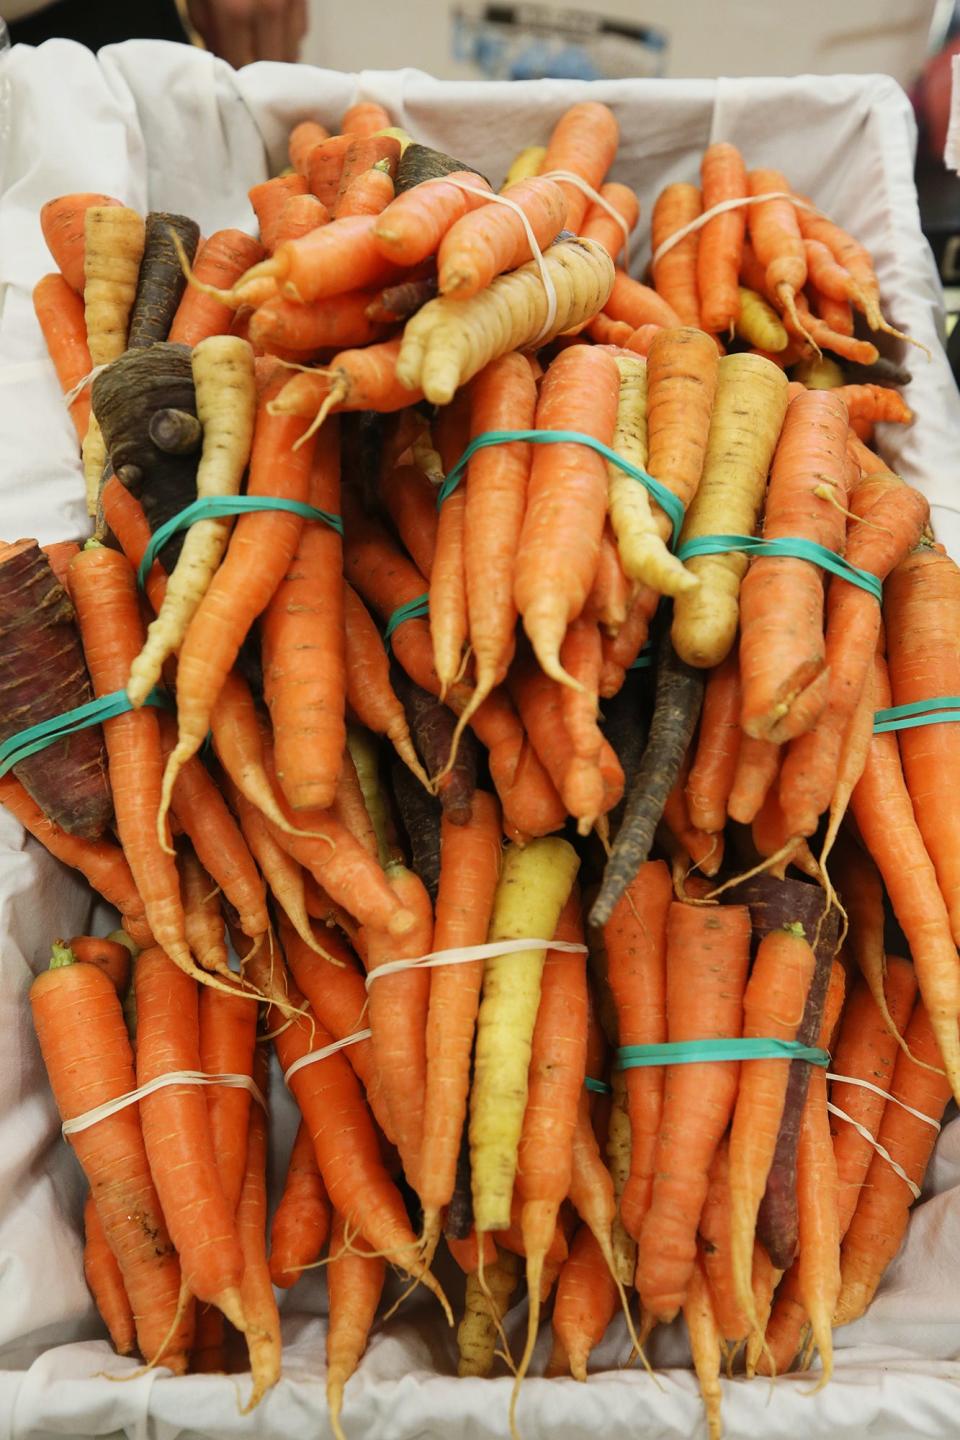 Rainbow carrots at the Countryside Winter Farmers' Market at Old Trail School in Bath.